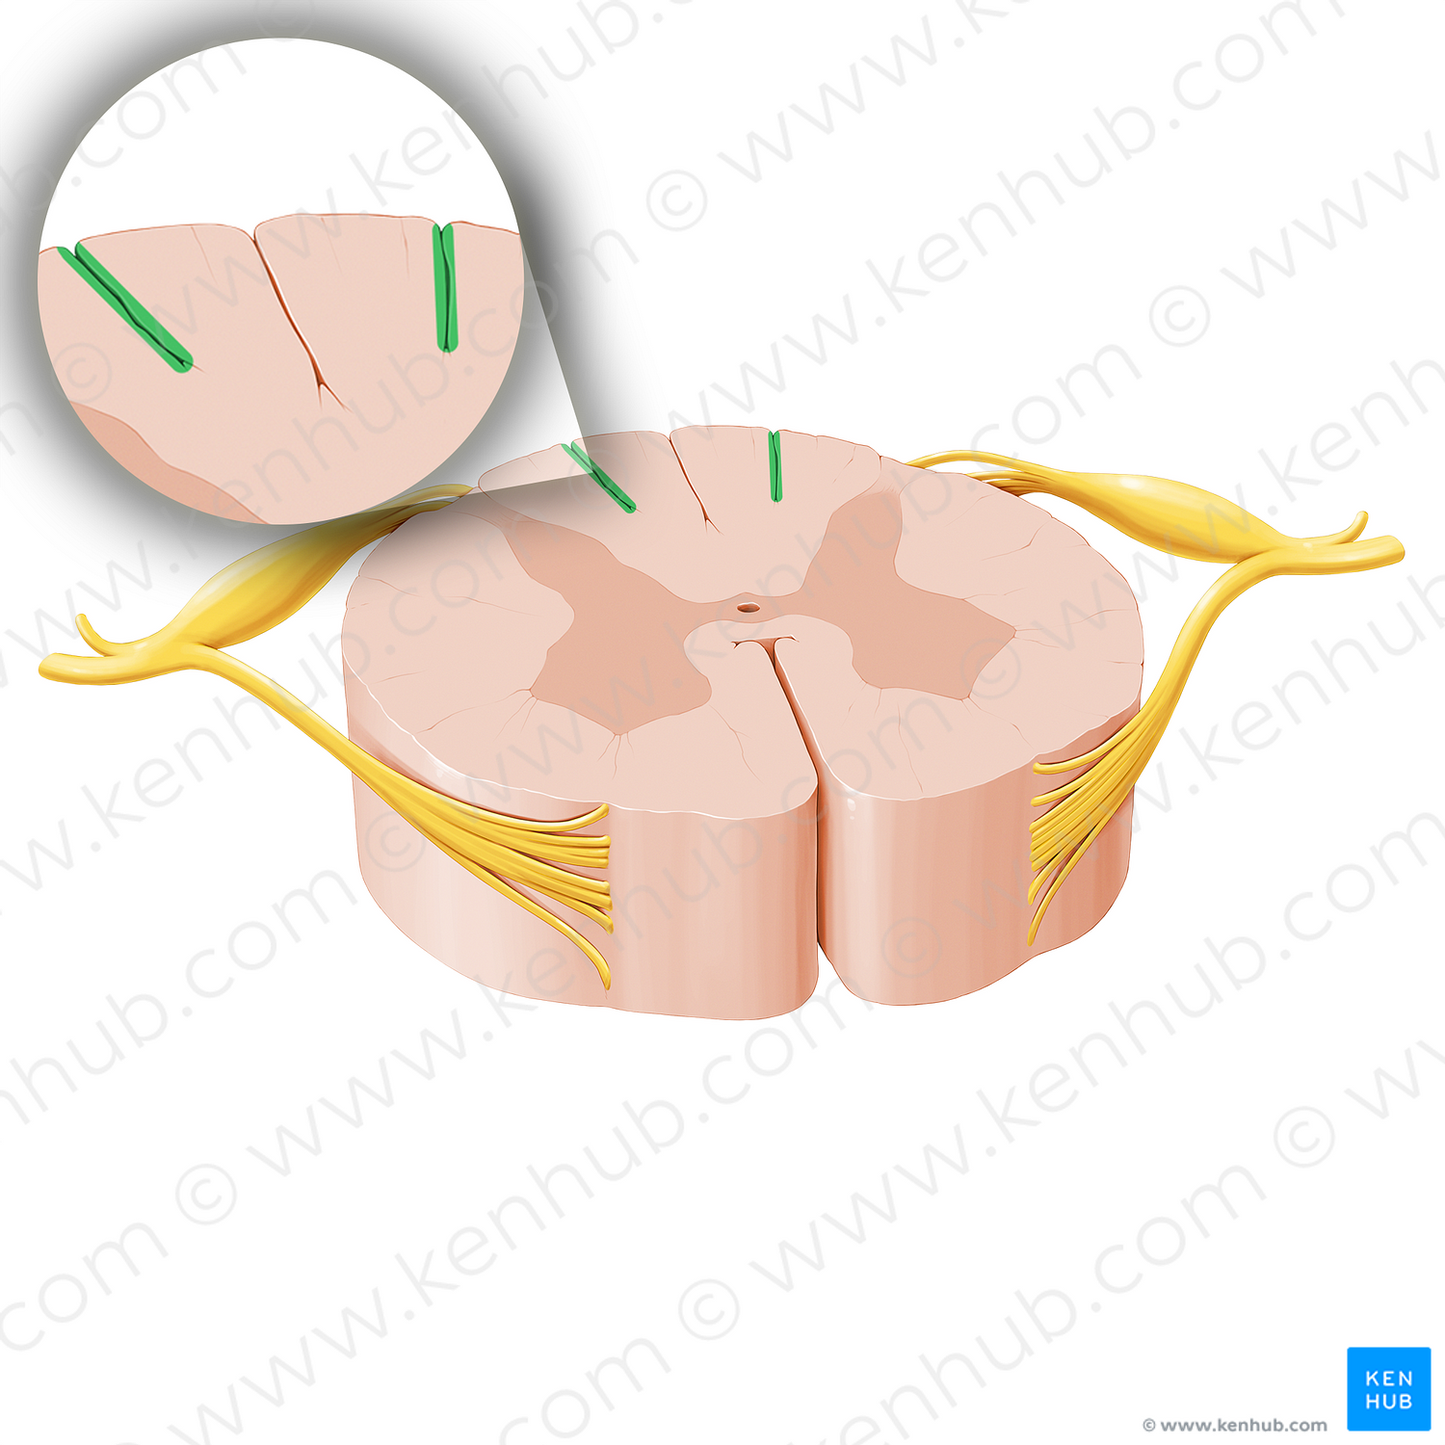 Posterior intermediate sulcus of spinal cord (#20752)